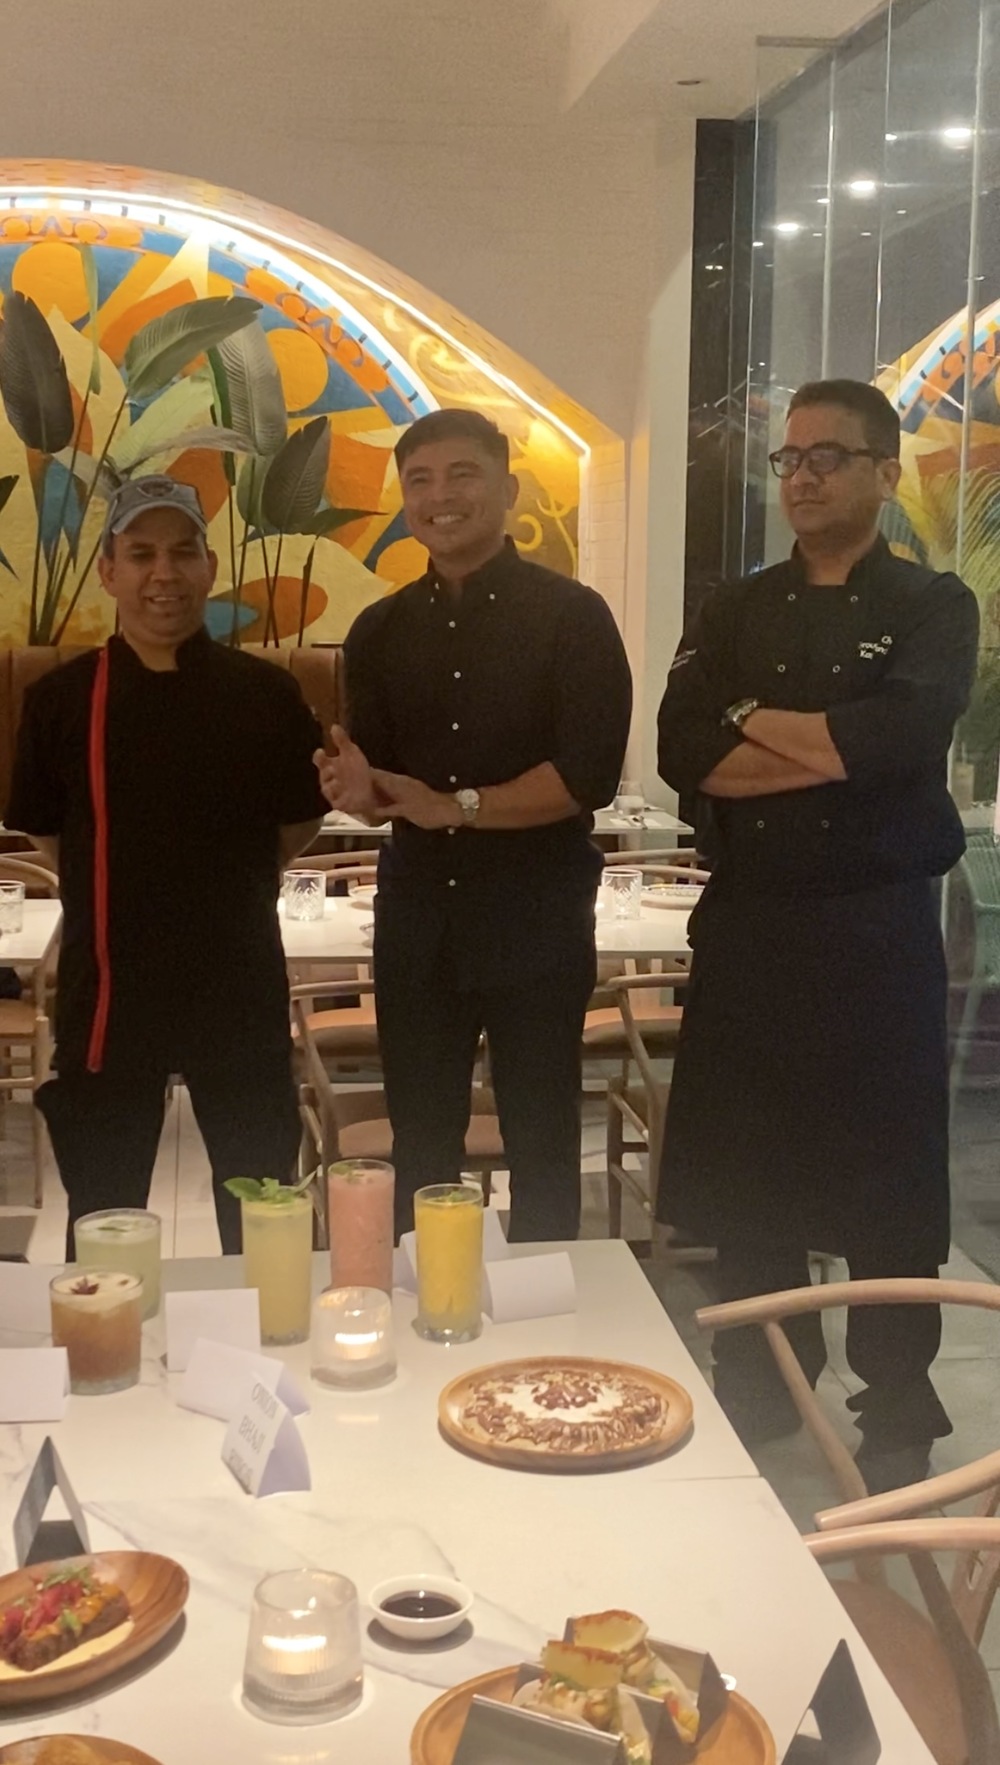 Food connoisseur Marvin Agustin just expanded his business portfolio with the addition of modern Indian kitchen and bar, Tango Tandoor.